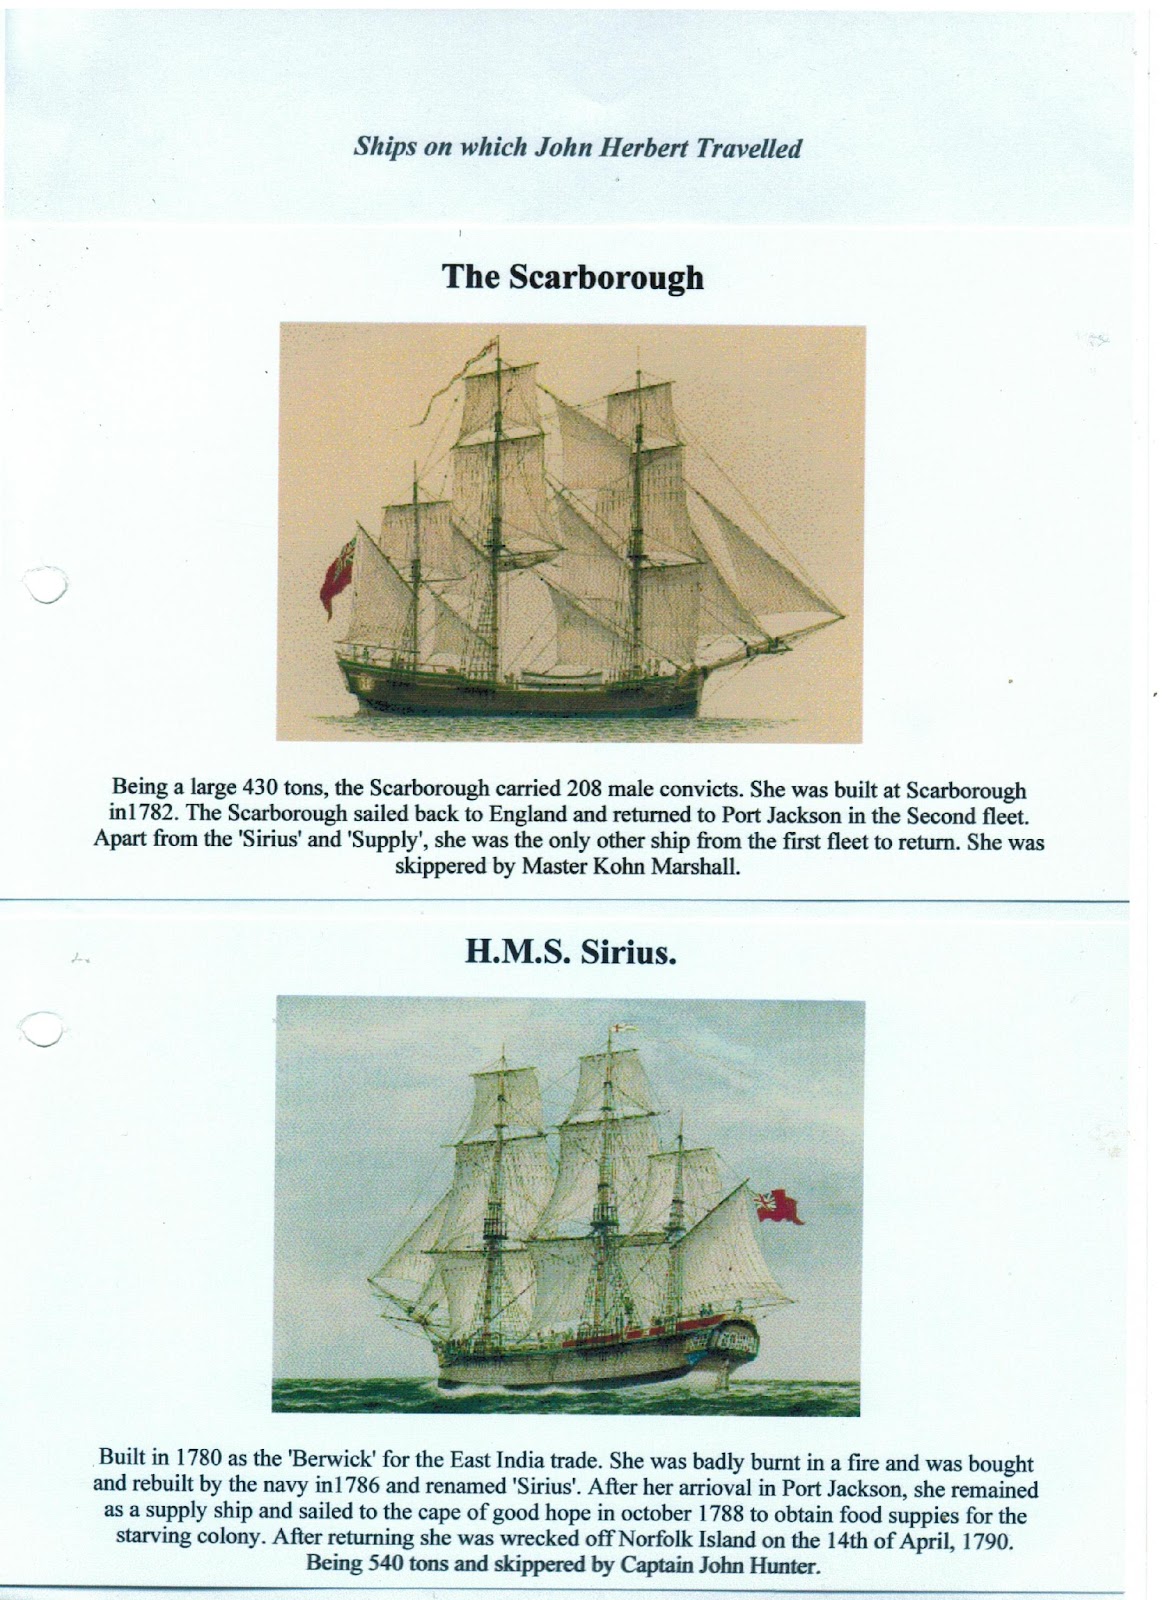 John Herbert travelled on The Scarborough and H.M.S. Sirius